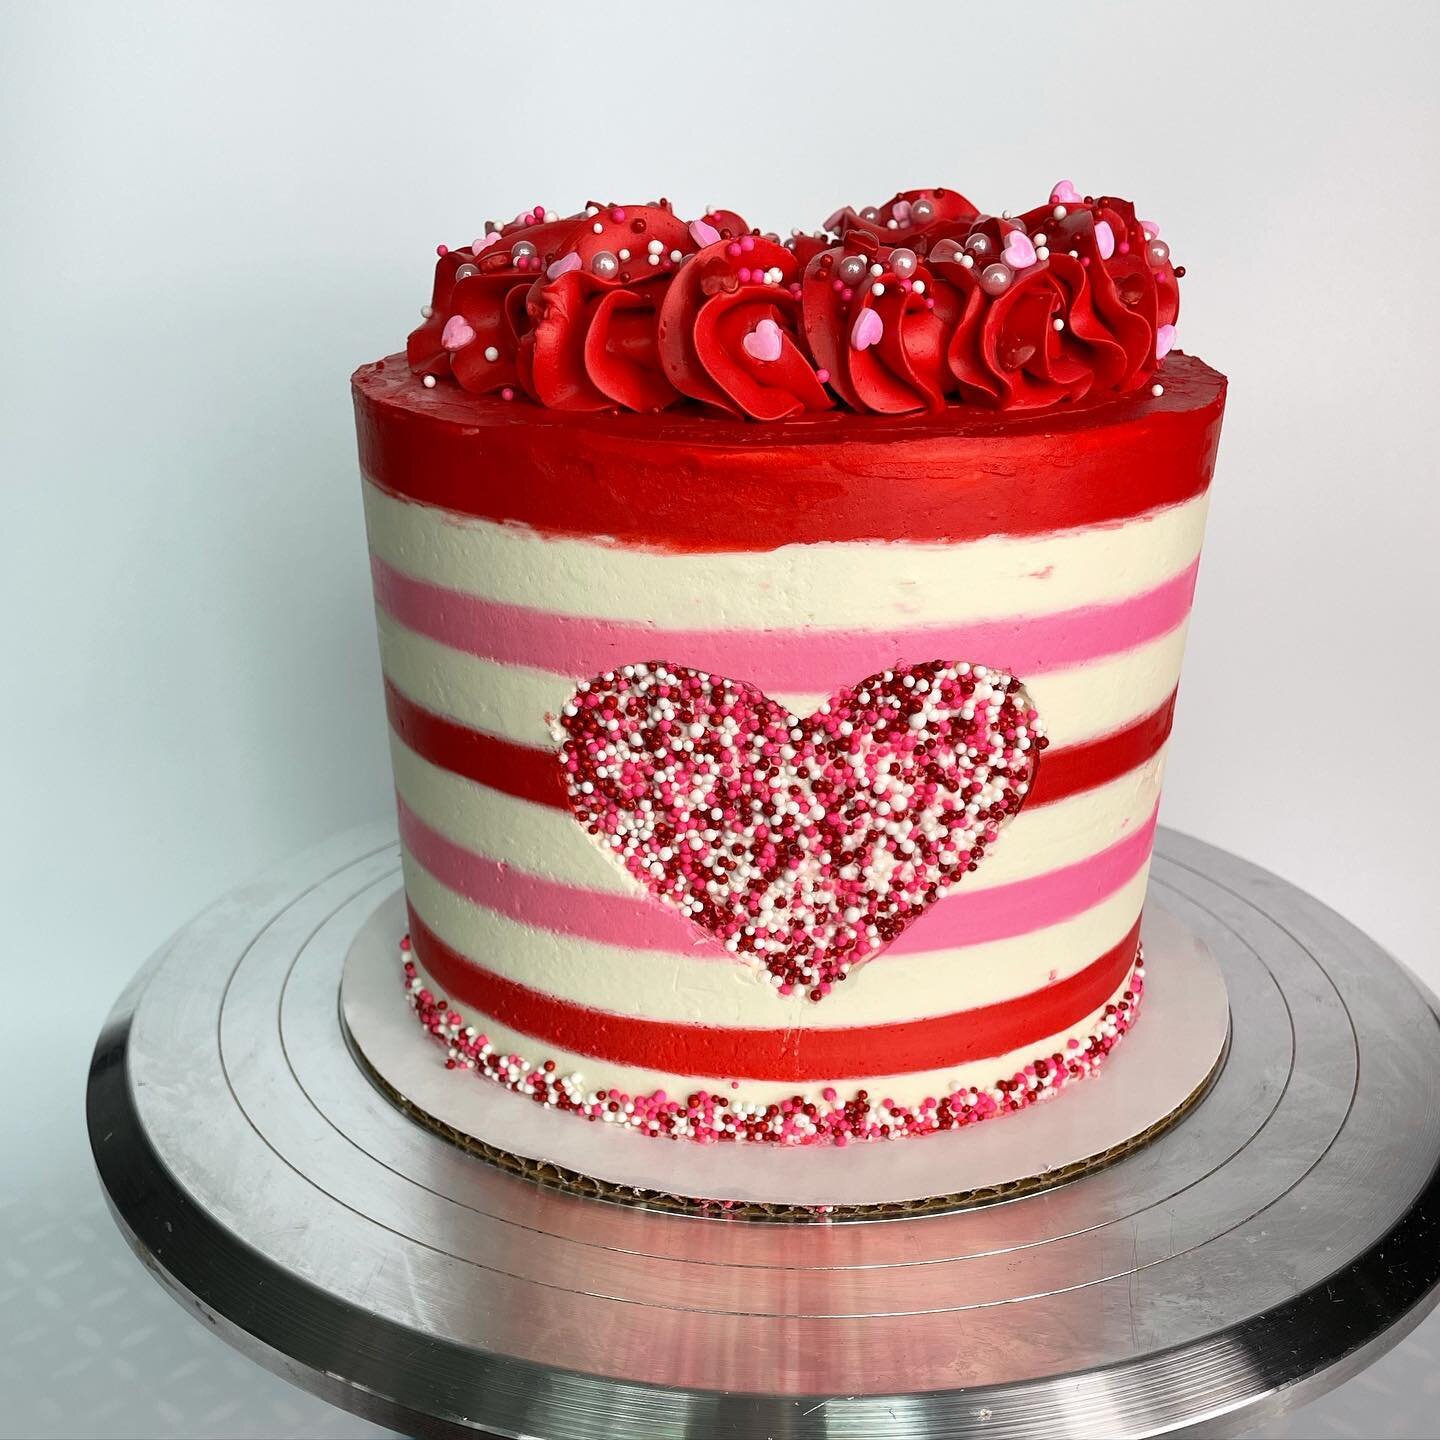 #valentinesday is almost here! 

This little cutie is chocolate buttermilk cake, chocolate ganache, coffee buttercream and a ton of sprinkle magic. Order at BellaTiers.com today!

#valentines #cakes #cake# #cakesofinstagram #nomnomnom #chocolate #hea